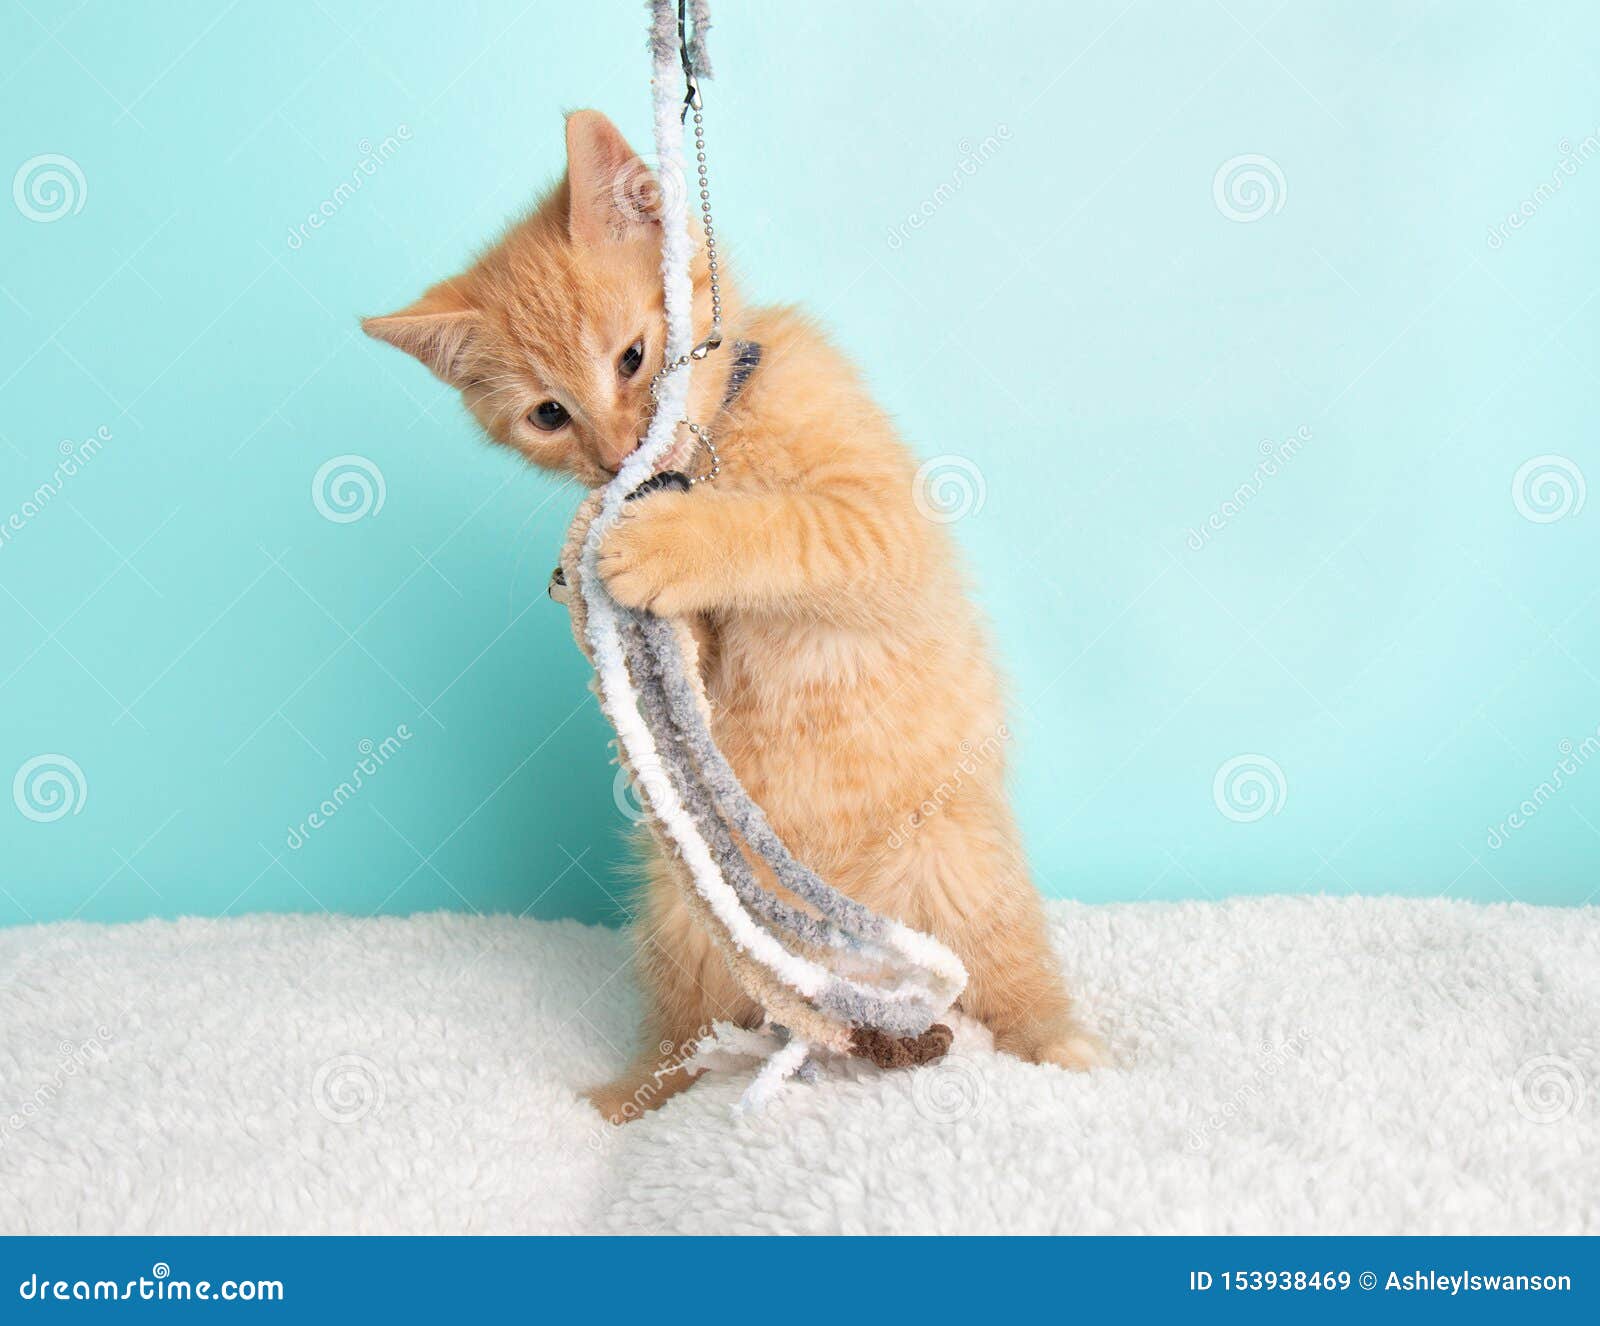 4 742 Kitten Rescue Photos Free Royalty Free Stock Photos From Dreamstime